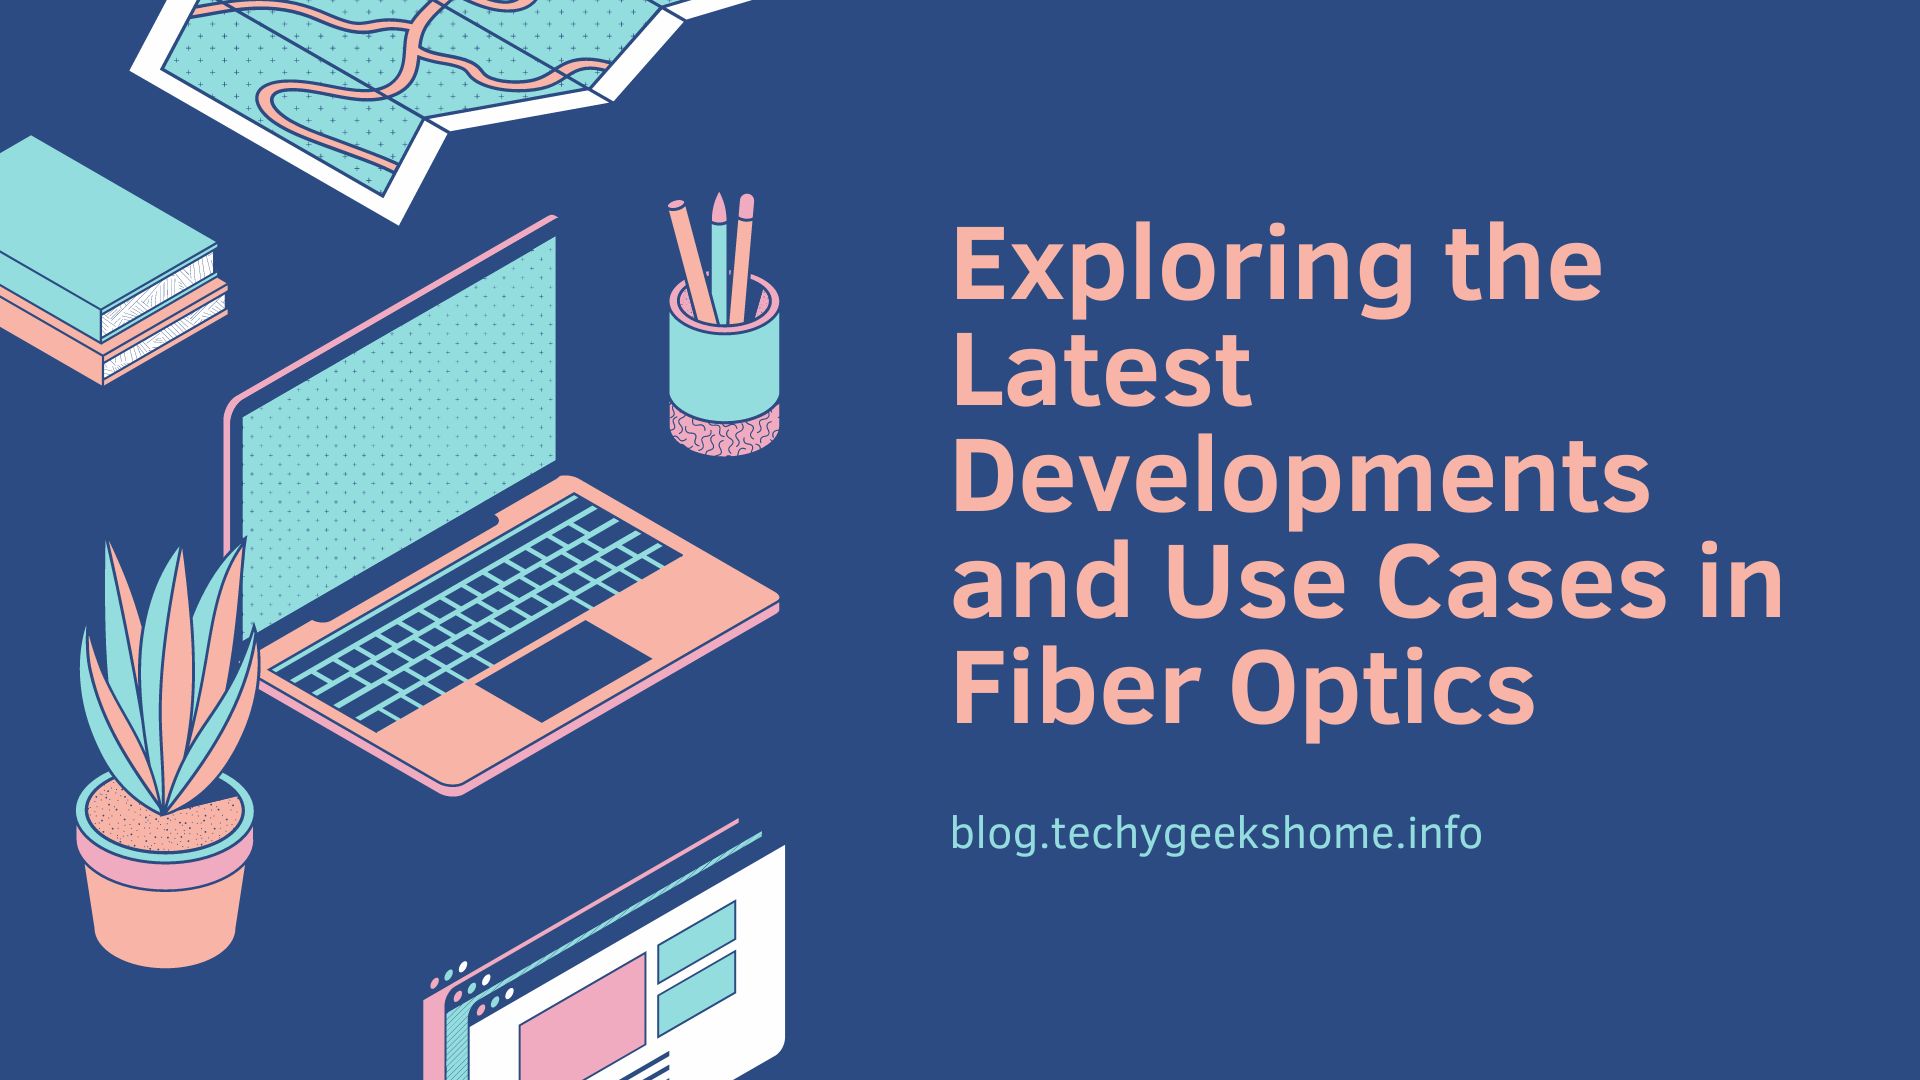 Exploring the Latest Developments and Use Cases in Fiber Optics